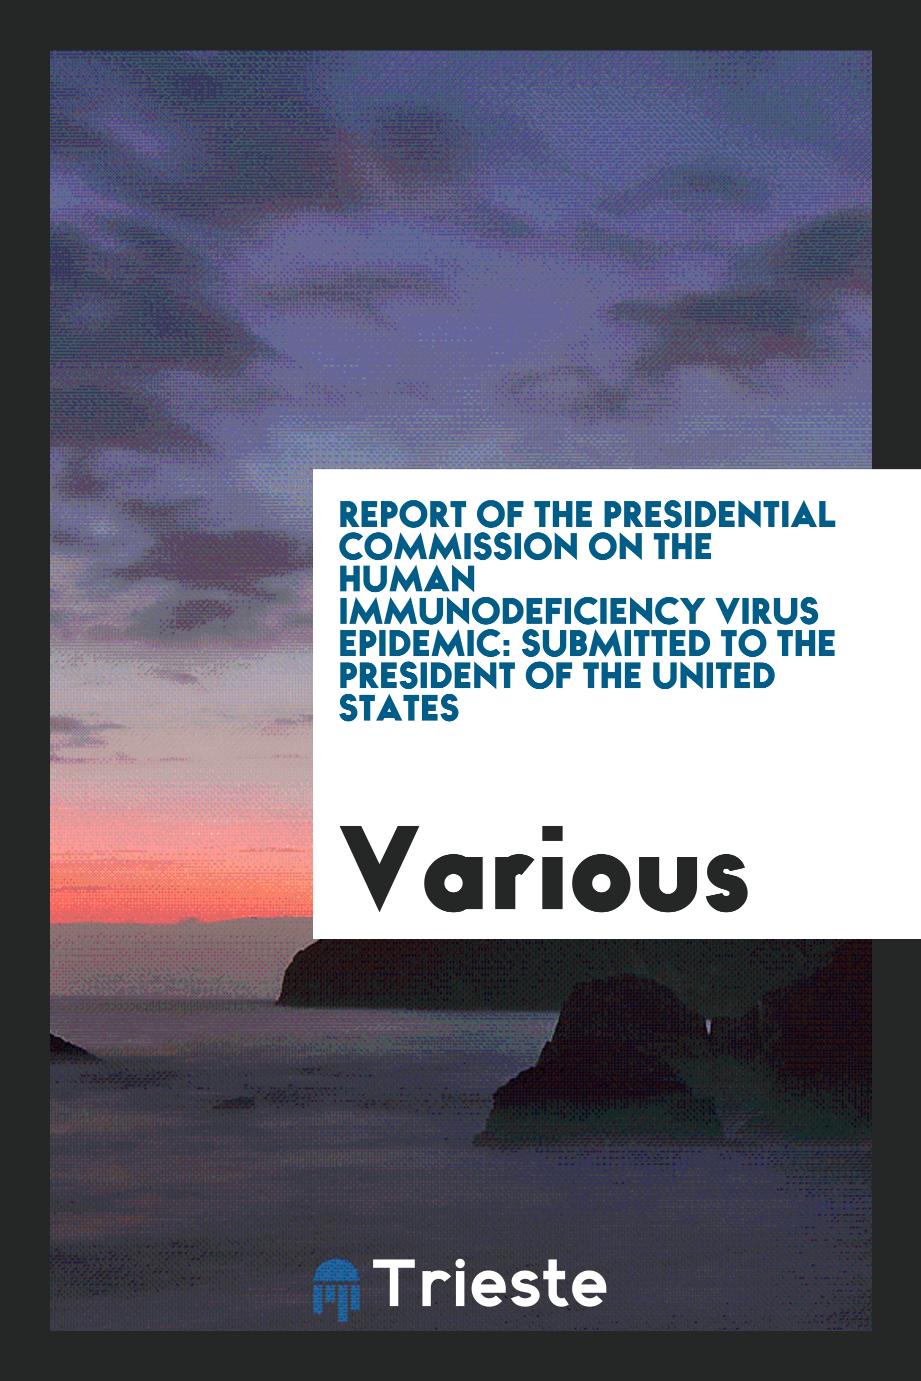 Report of the Presidential Commission on the Human Immunodeficiency Virus Epidemic: submitted to the President of the United States